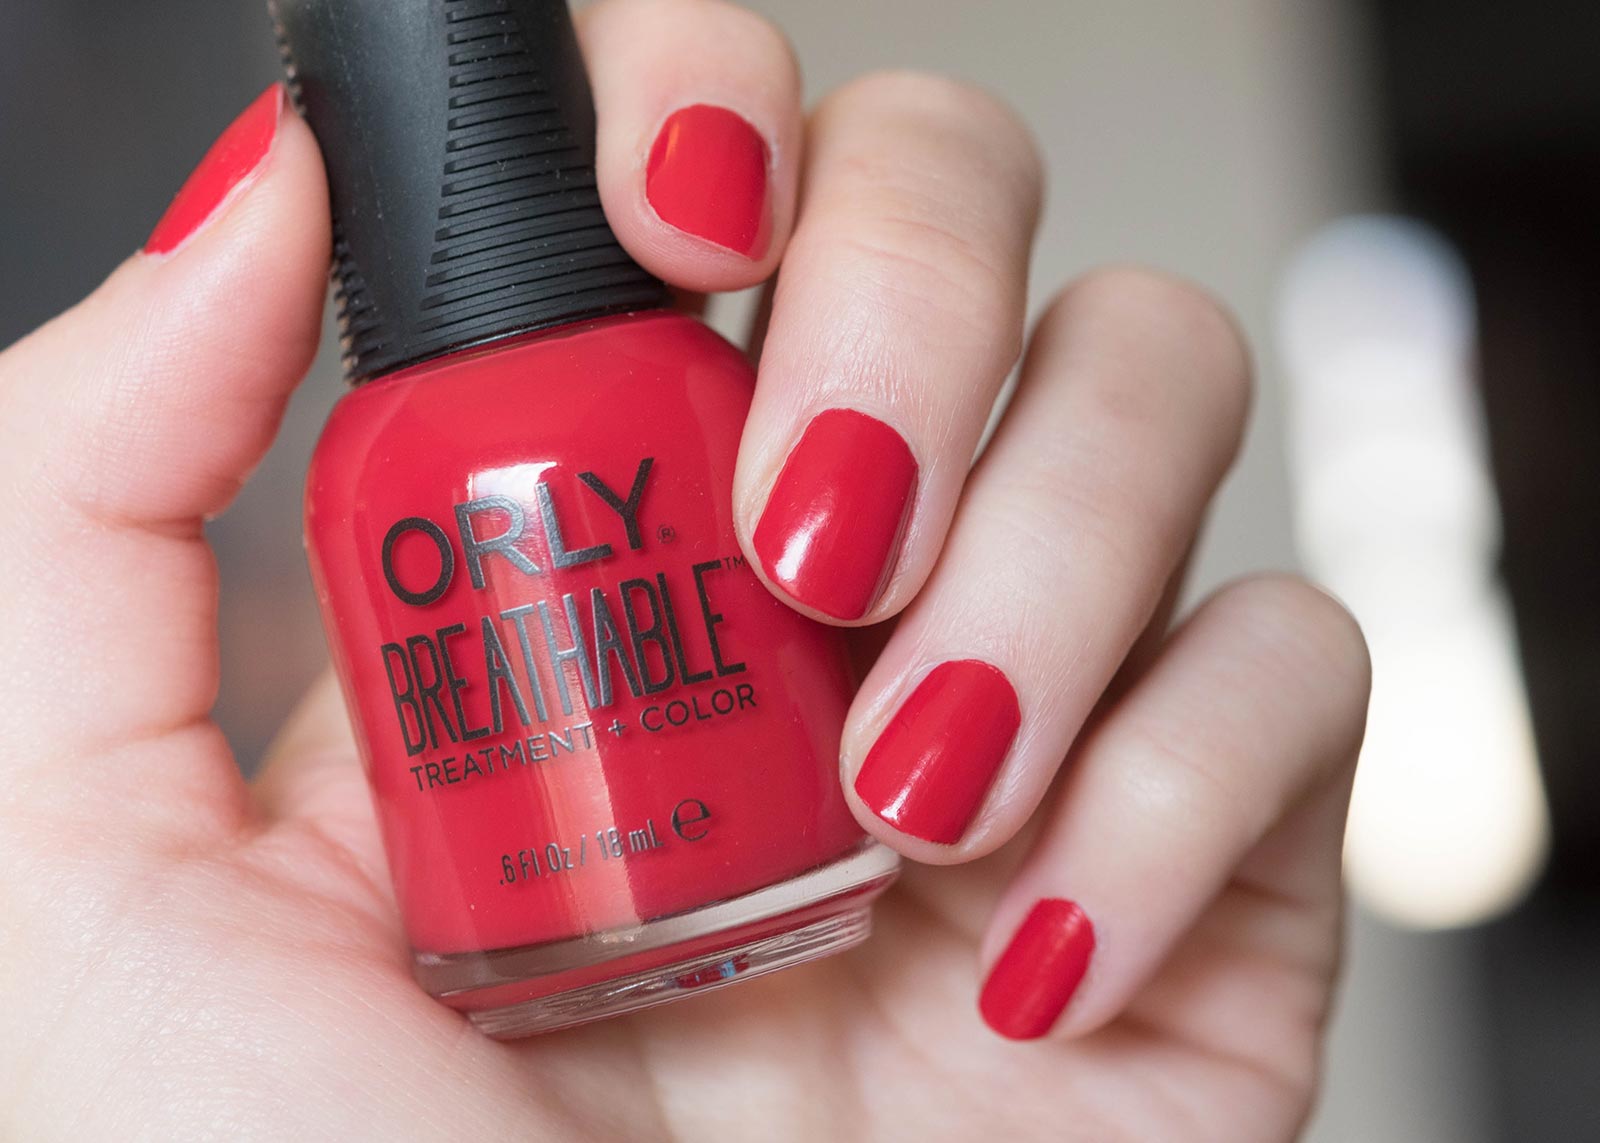 6. Orly Breathable Treatment + Color Nail Polish, Clear - wide 7